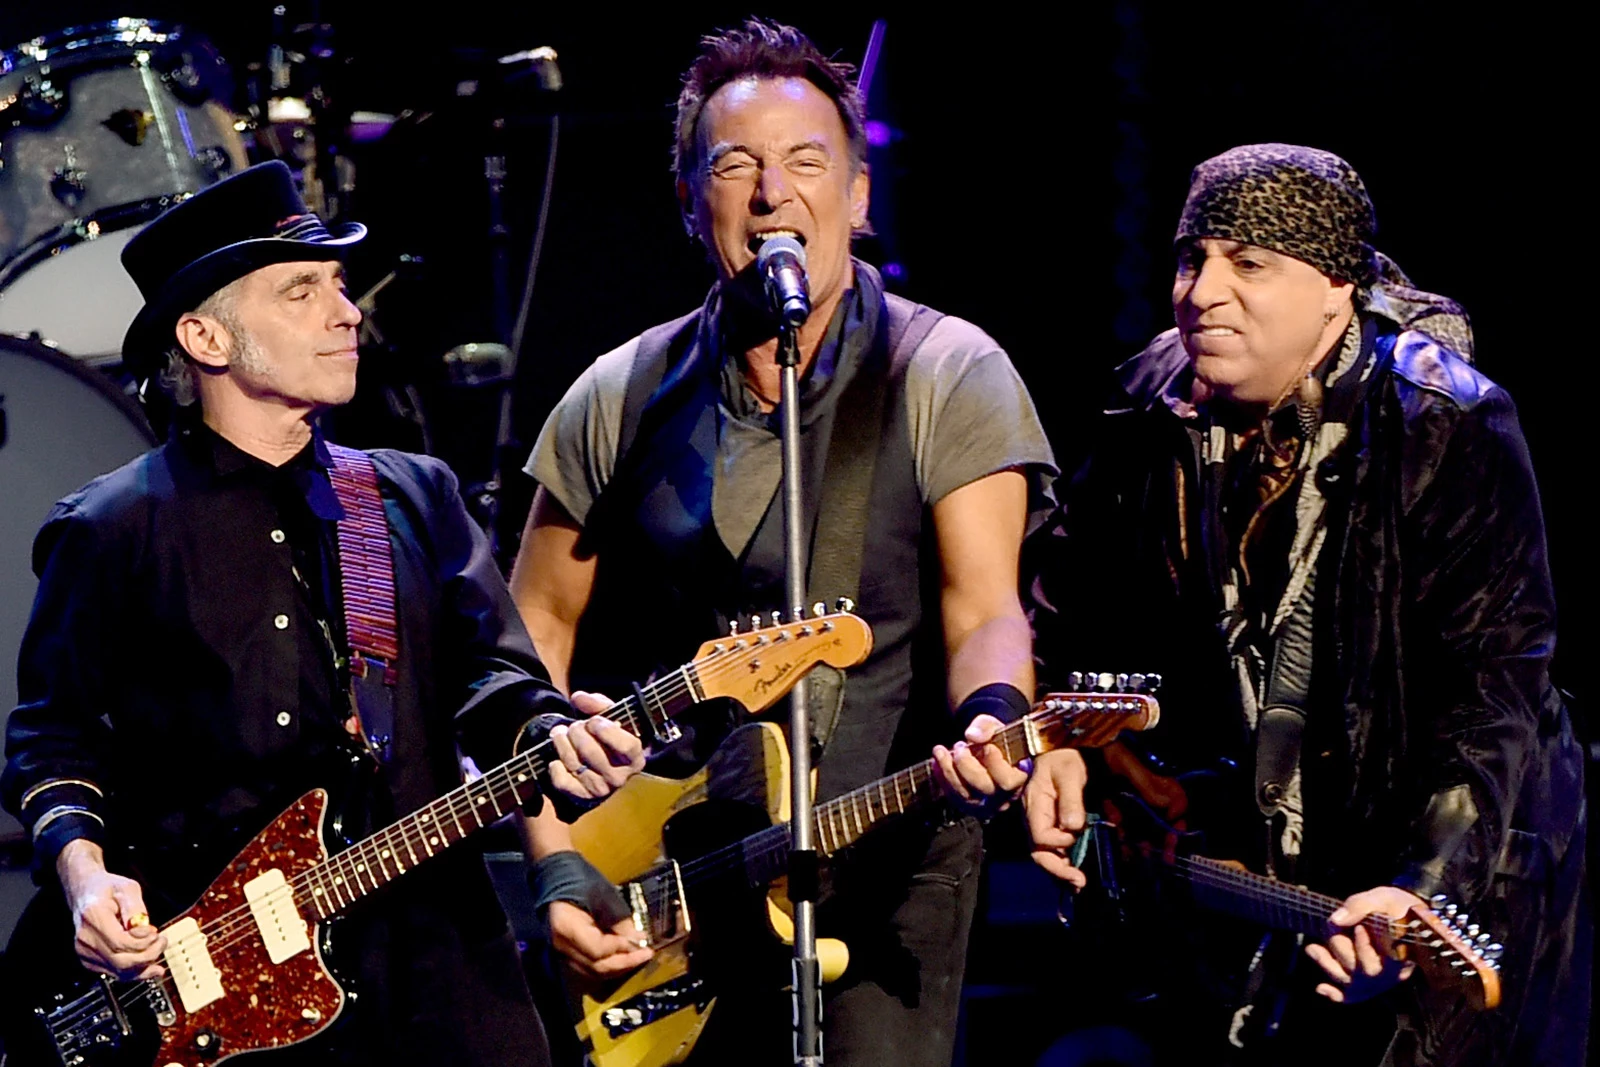 The Six-Year Wait for Bruce Springsteen’s E Street Band Reunion